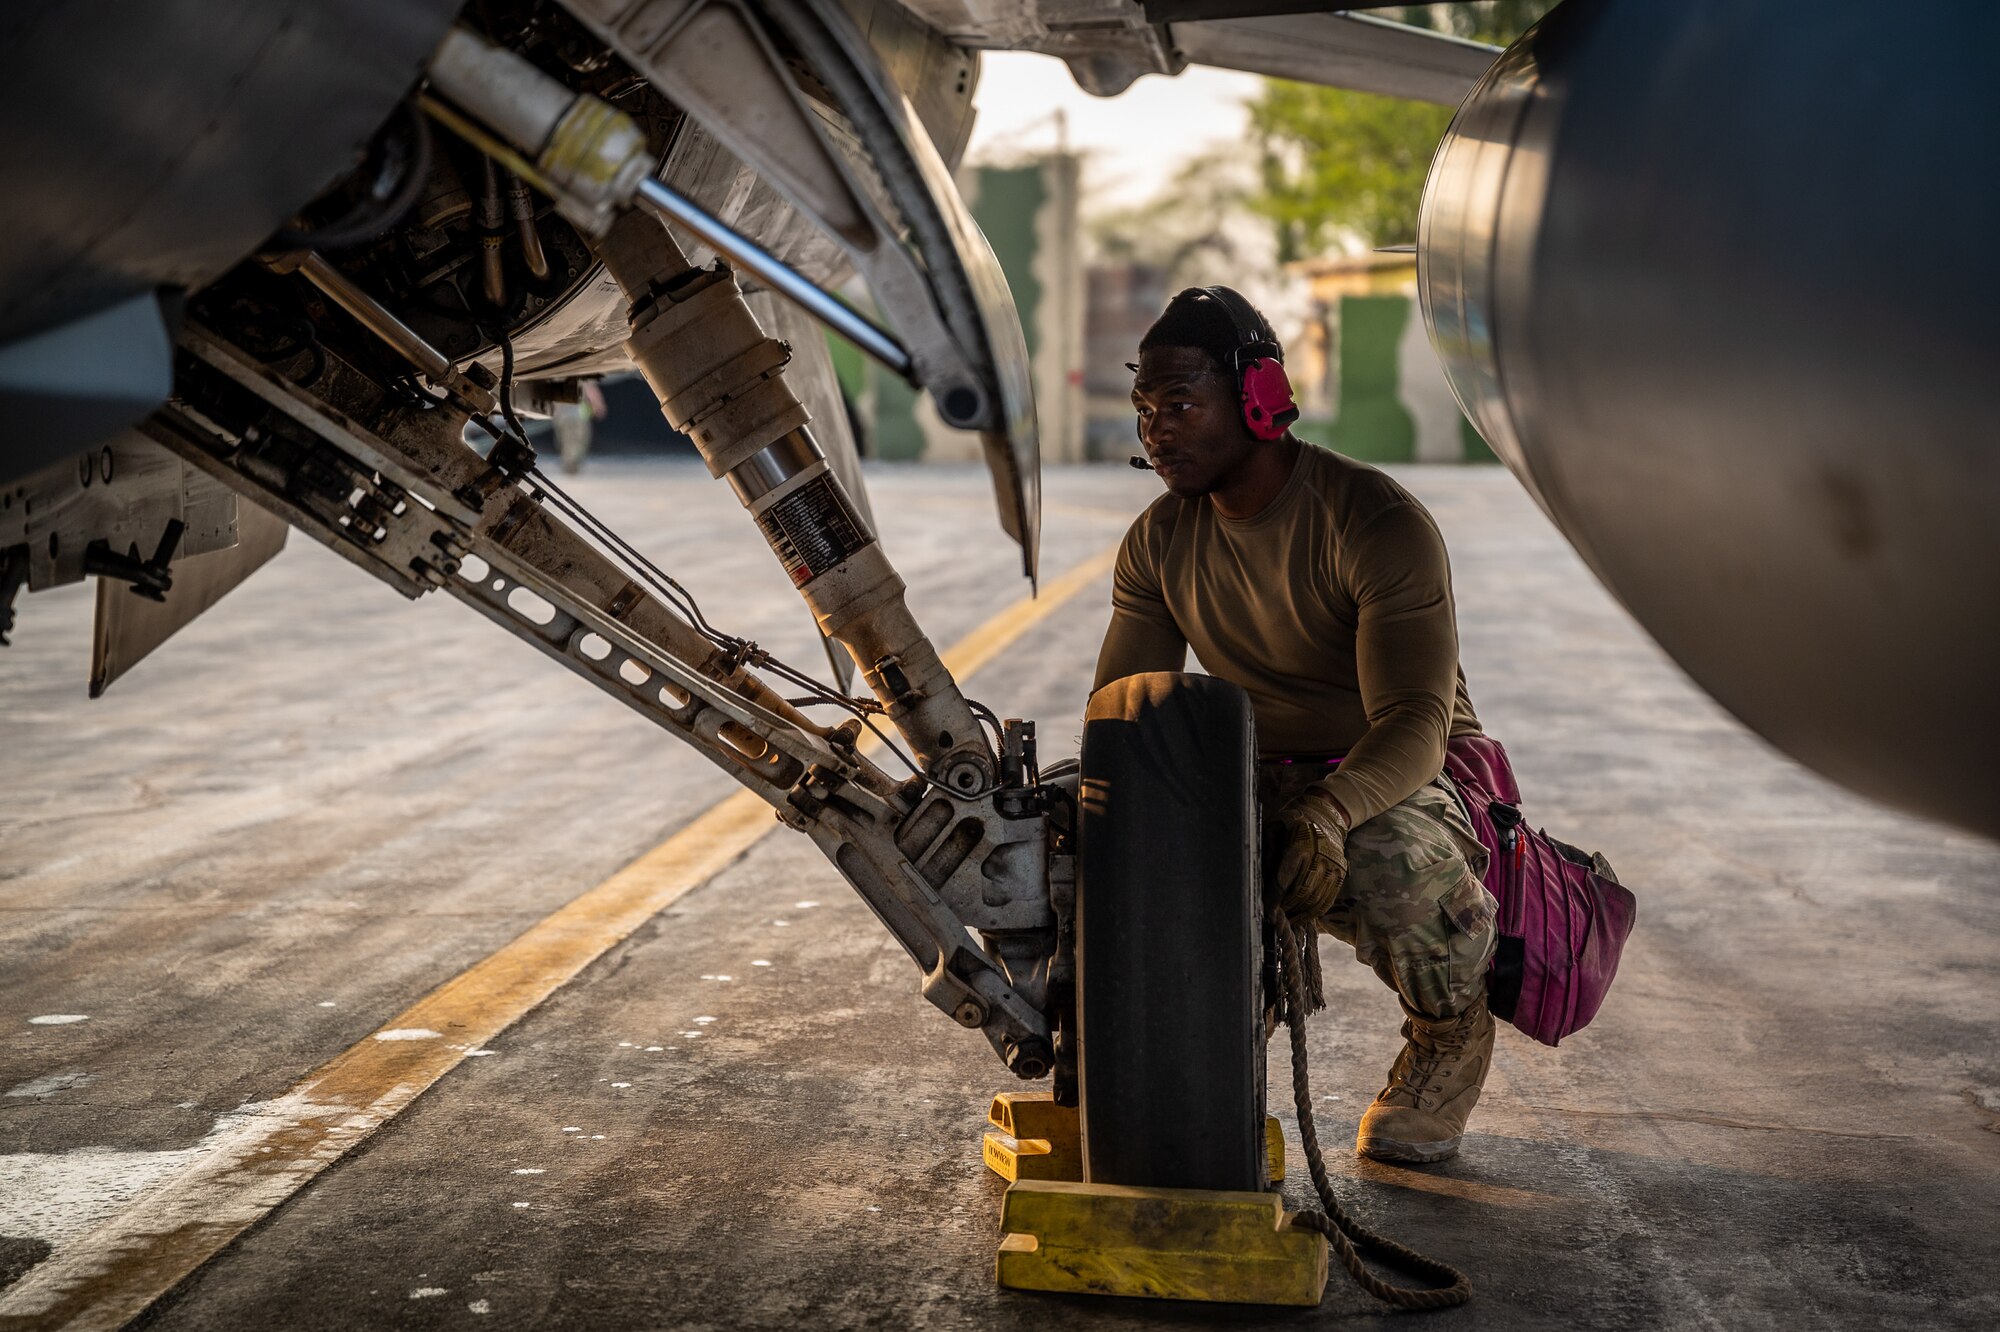 Staff Sgt. Avary Kemp, 55th Expeditionary Fighter Generation Squadron weapons load crew member, performs an end of runway inspection on a 55th Expeditionary Fighter Squadron F-16 Fighting Falcon aircraft after landing at a Pakistan operational air force base, Feb. 26, 2022. Kemp, along with other U.S. Air Force members from across the Air Forces Central area of responsibility, deployed to Pakistan in support of Falcon Talon 2022. This Agile Combat Employment operation is the first bilateral training event between the United States and Pakistan since 2019. (U.S. Air Force photo by Master Sgt. Christopher Parr)